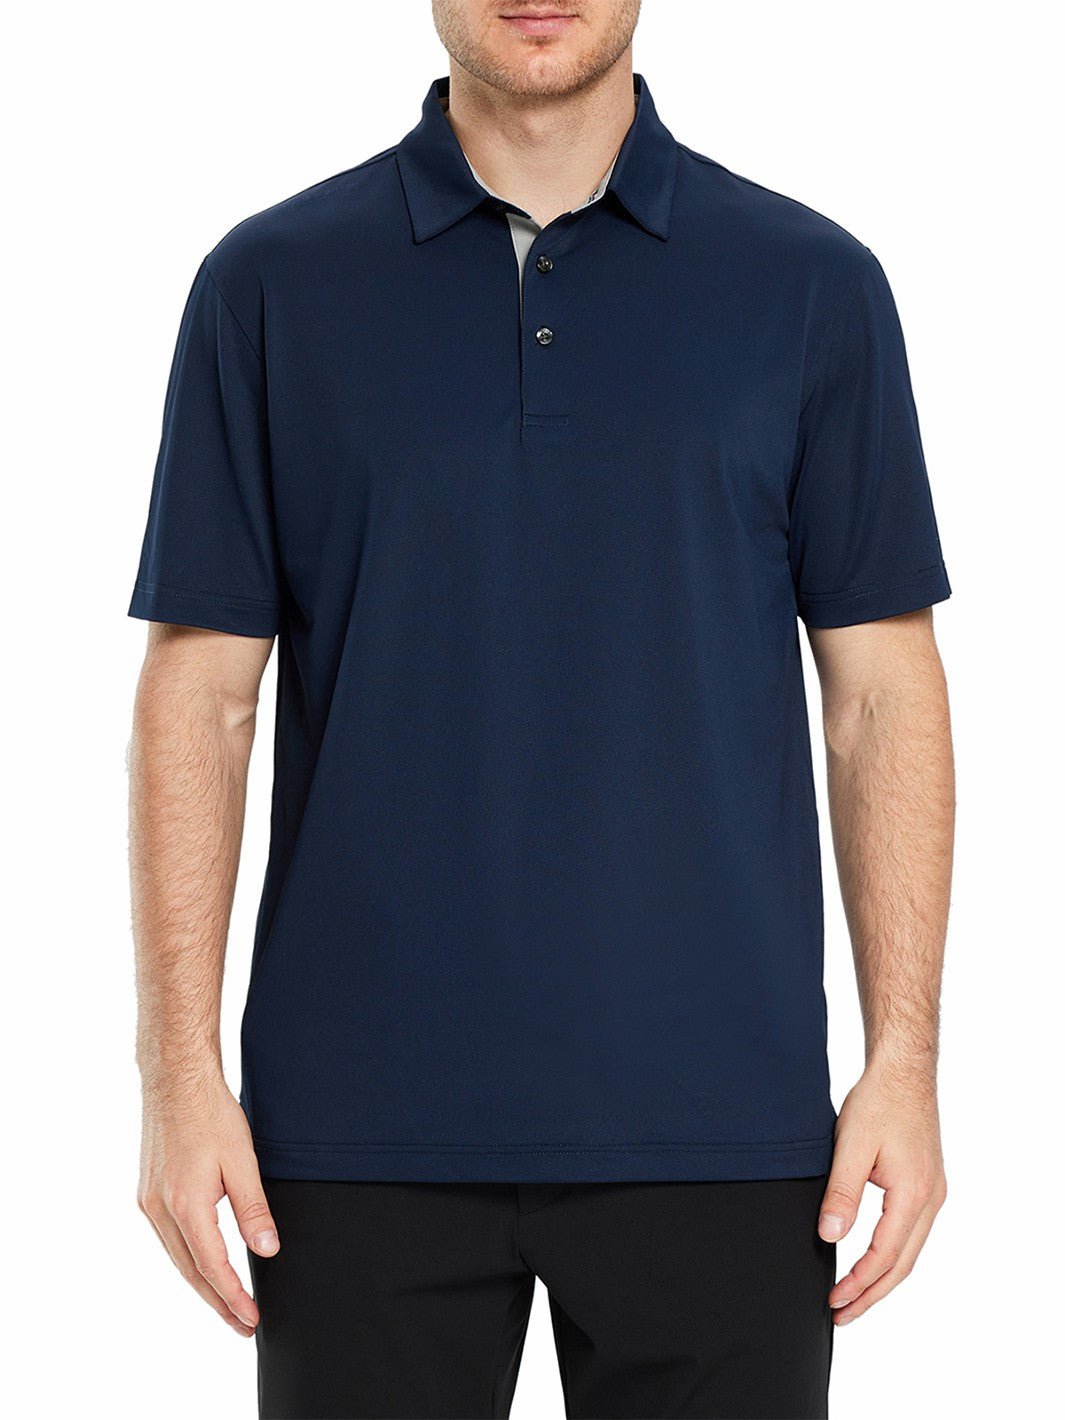 Solid Pique Moisture Wicking Dry Fit Golf Polo Shirts for Men